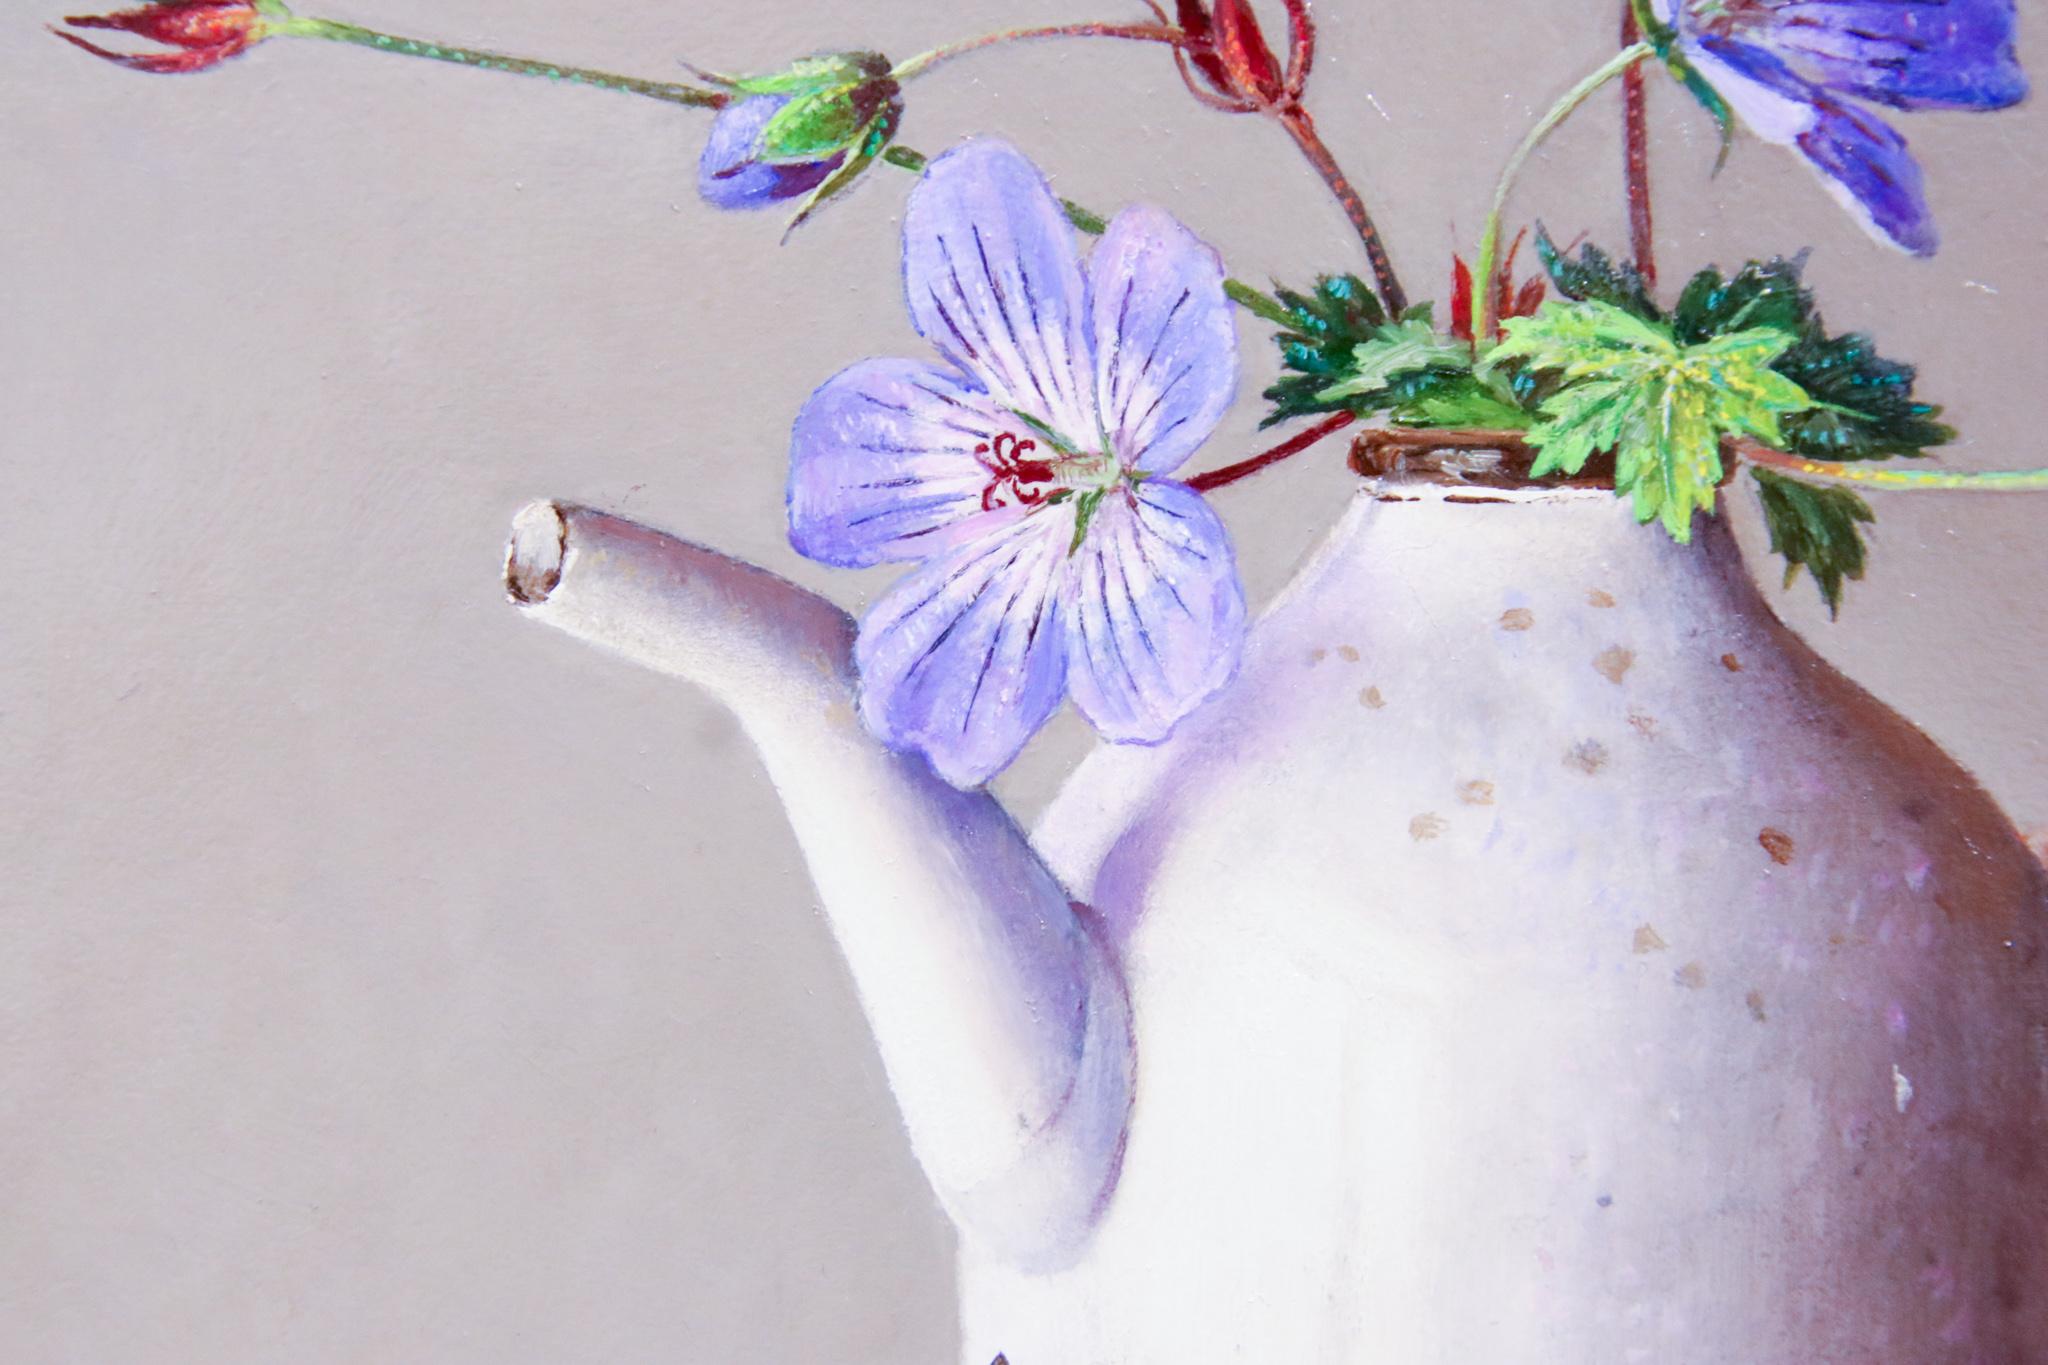 Wild Geranium in Little White Jug - 21st Century Contemporary Oil Painting - Gray Still-Life Painting by Ingrid Smuling